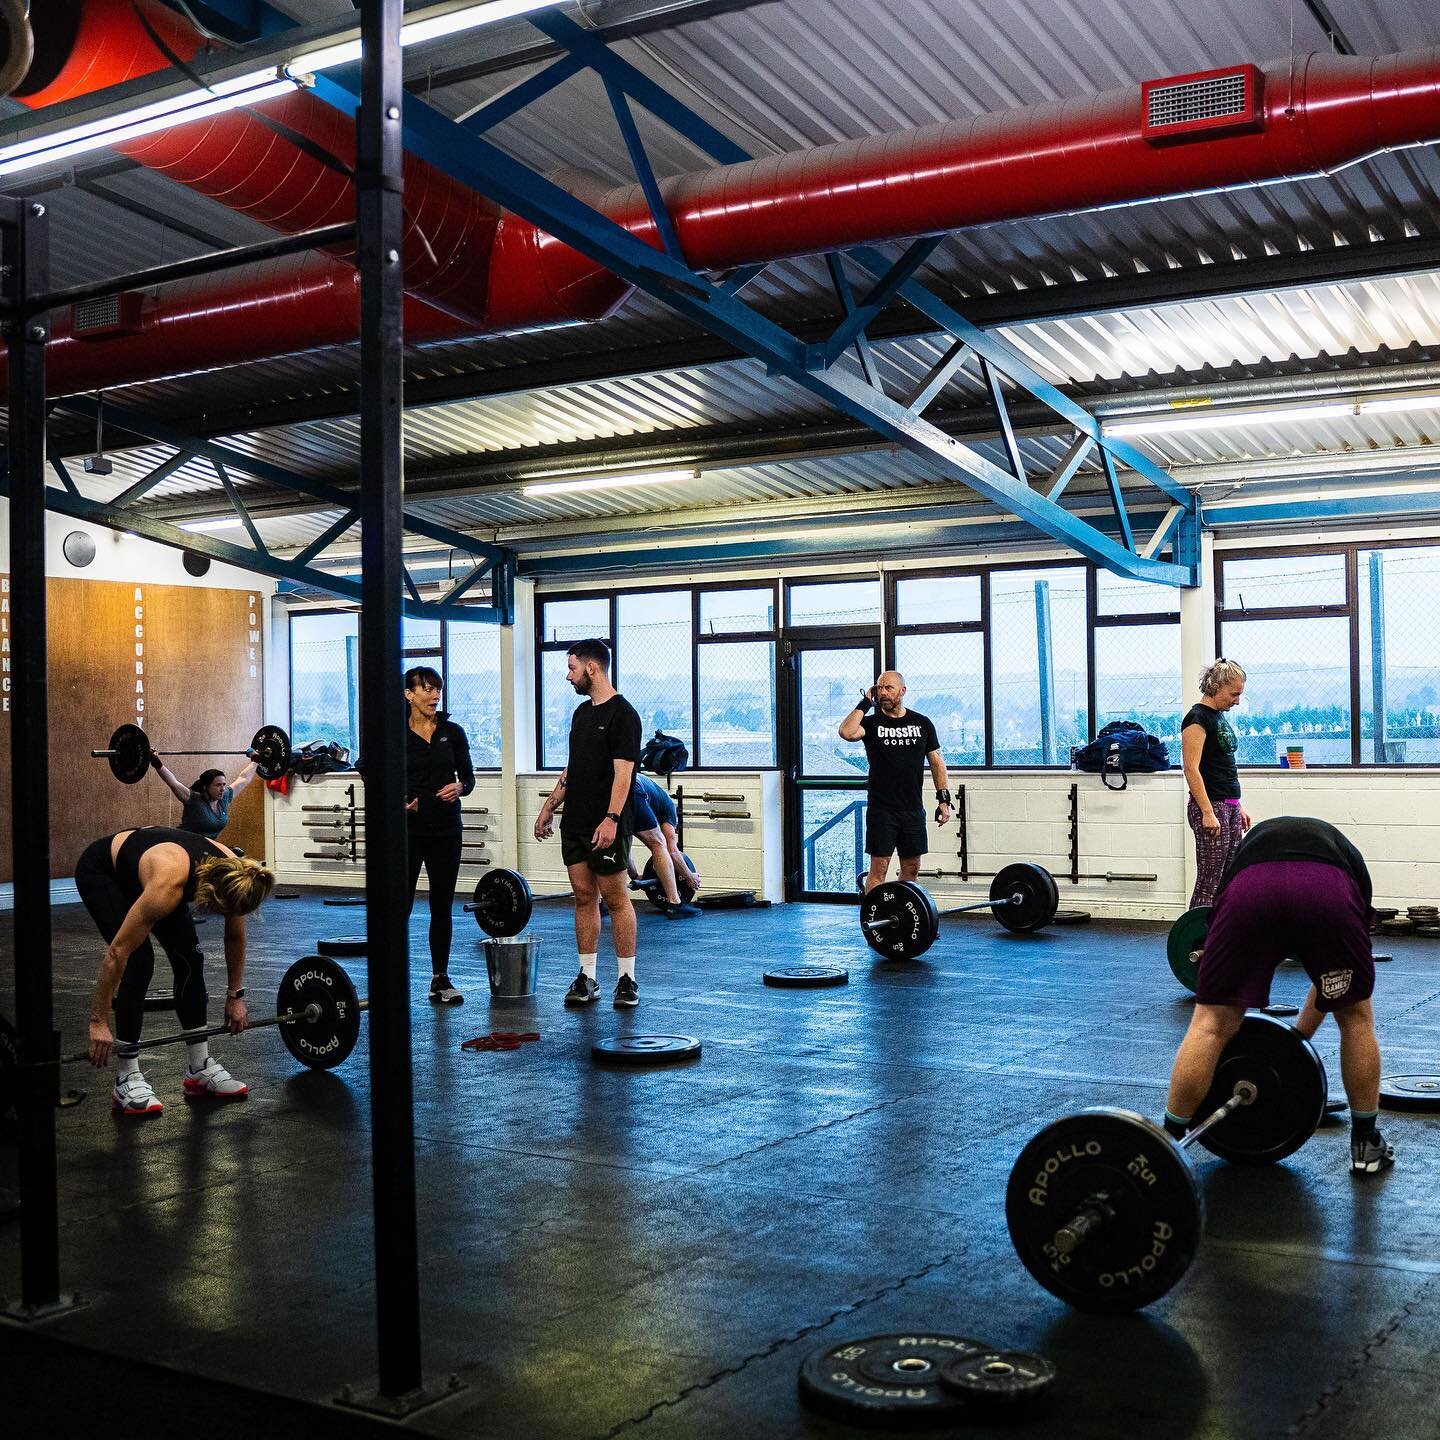 Don&rsquo;t join a gym!! Join a community of like minded people that want to see you succeed. If you&rsquo;re looking for some accountability, motivation and expert guidance please get in touch.📩

#teamcfg #crossfit #crossfitgorey #fitness #lifestyl